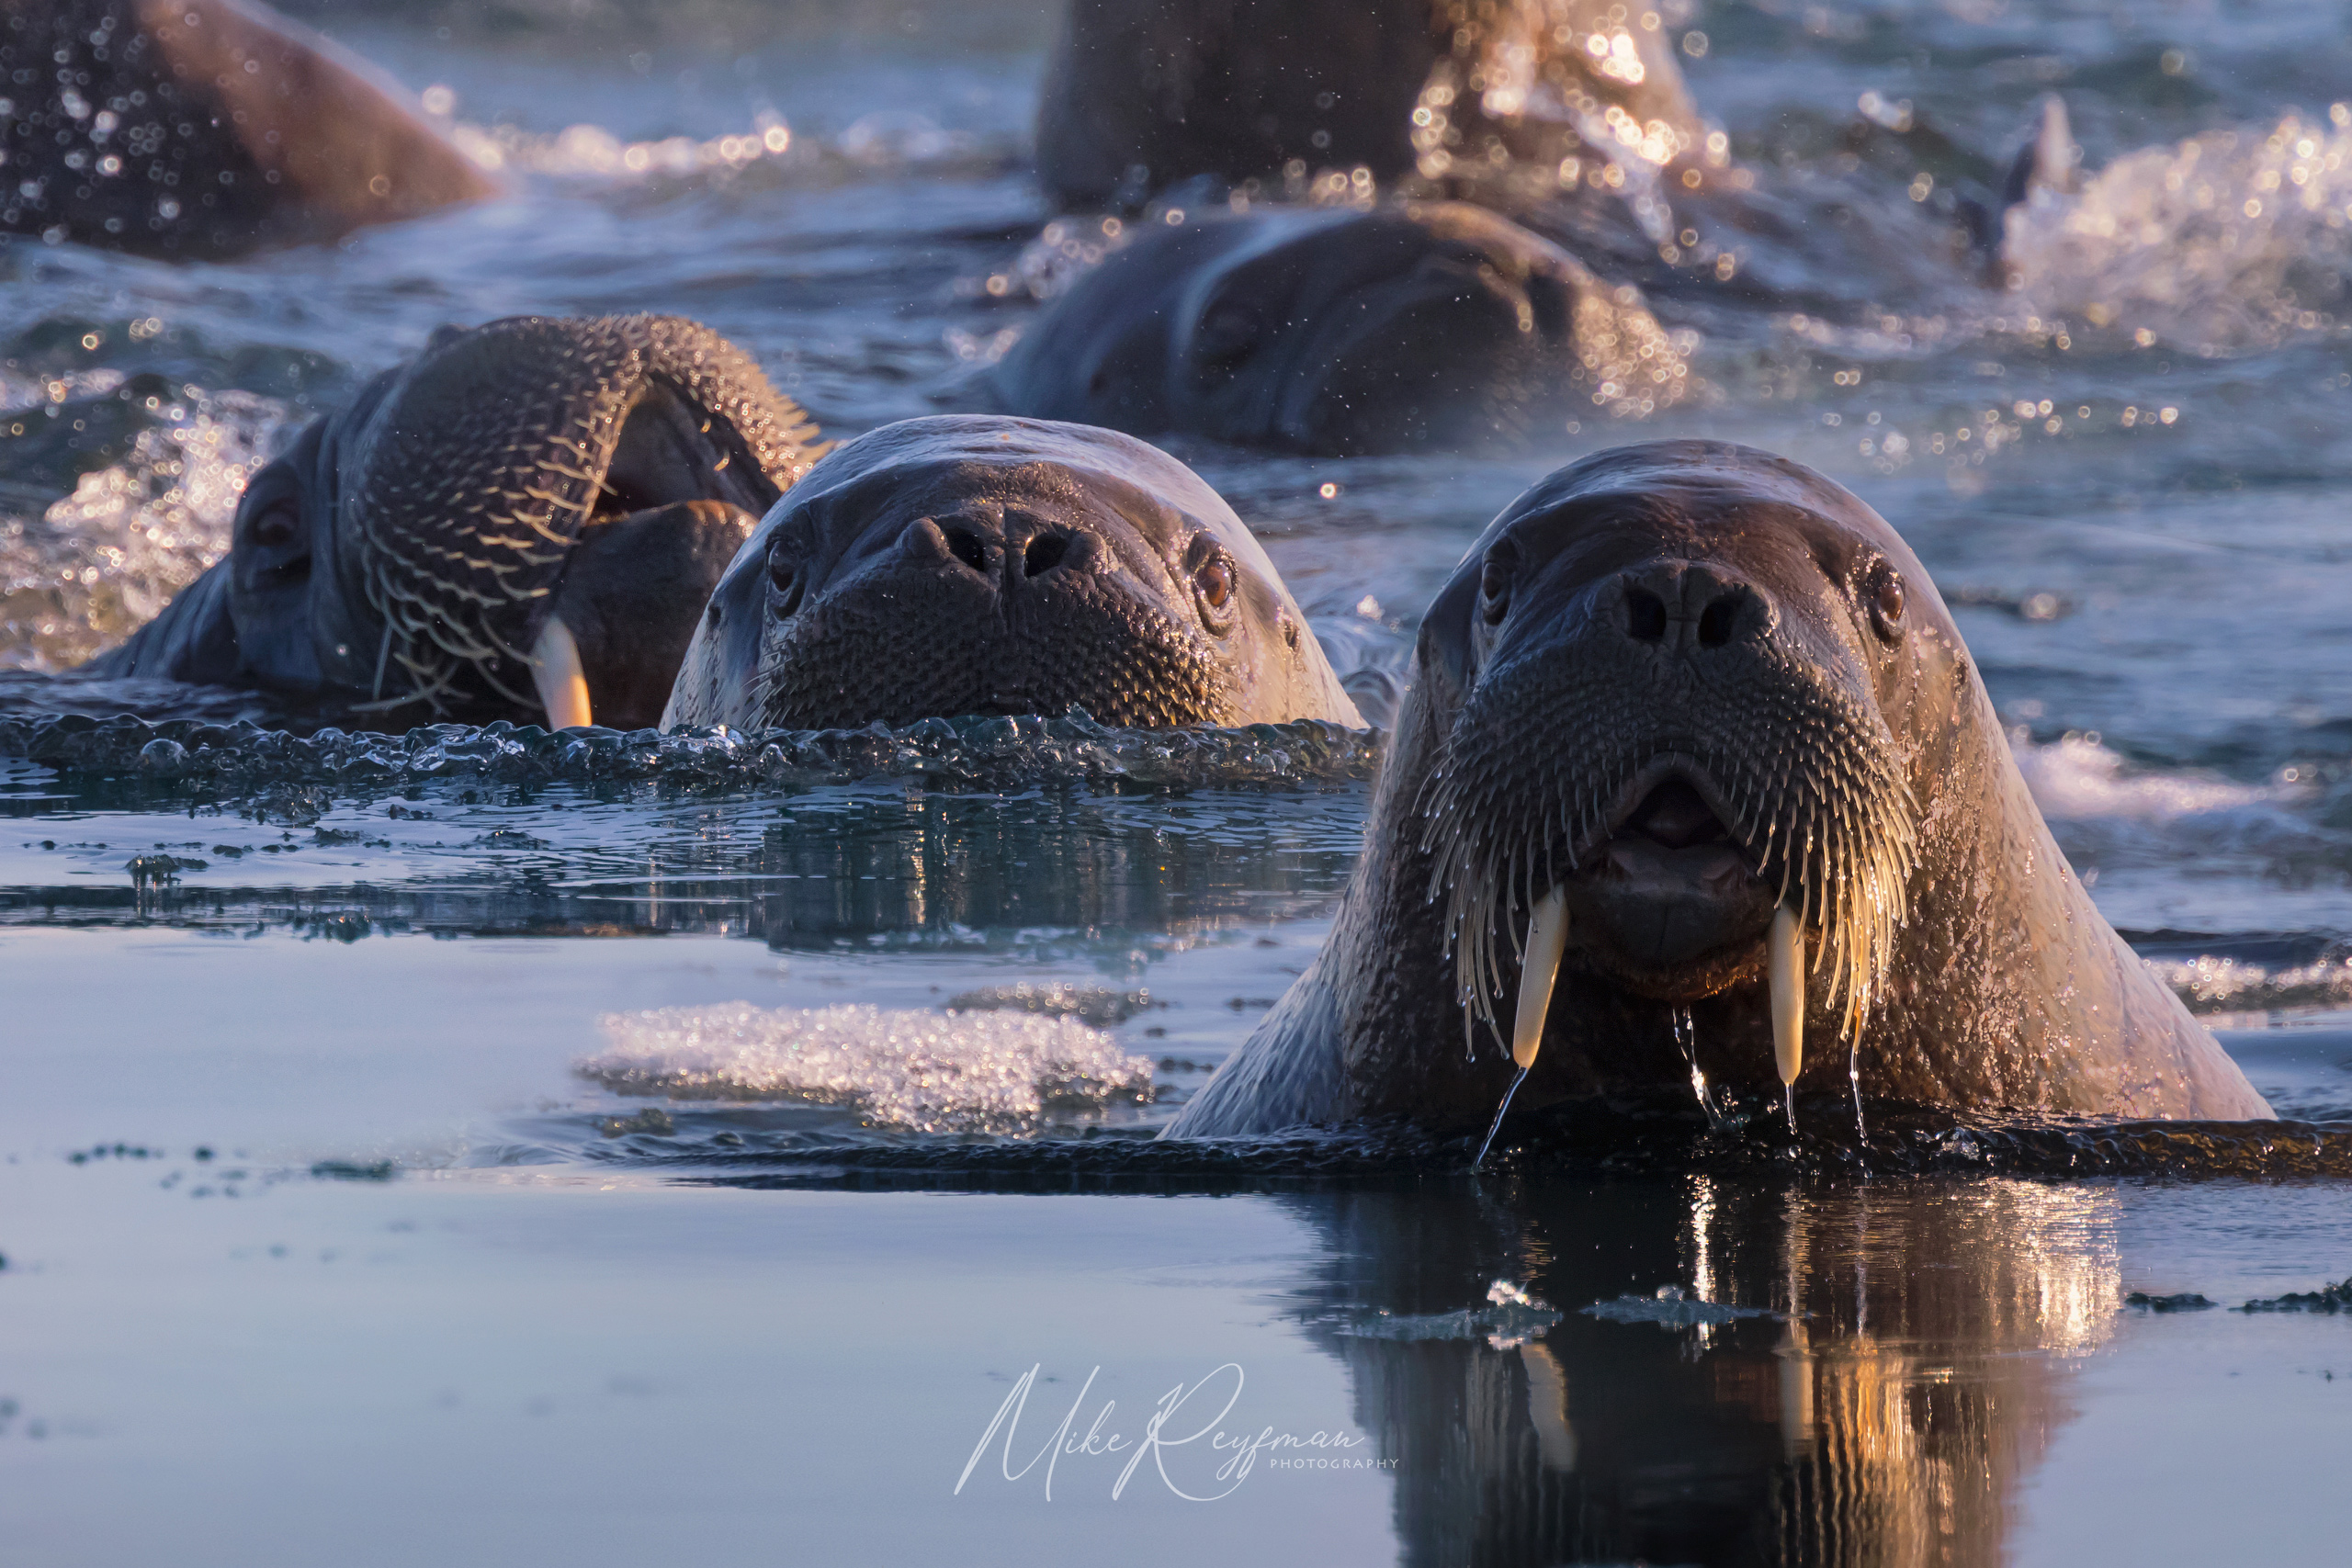 The Gang of Walruses WL-SV-002-Z8A6619 - The Walruses and Seals of Svalbard (Spitsbergen) - Mike Reyfman Photography